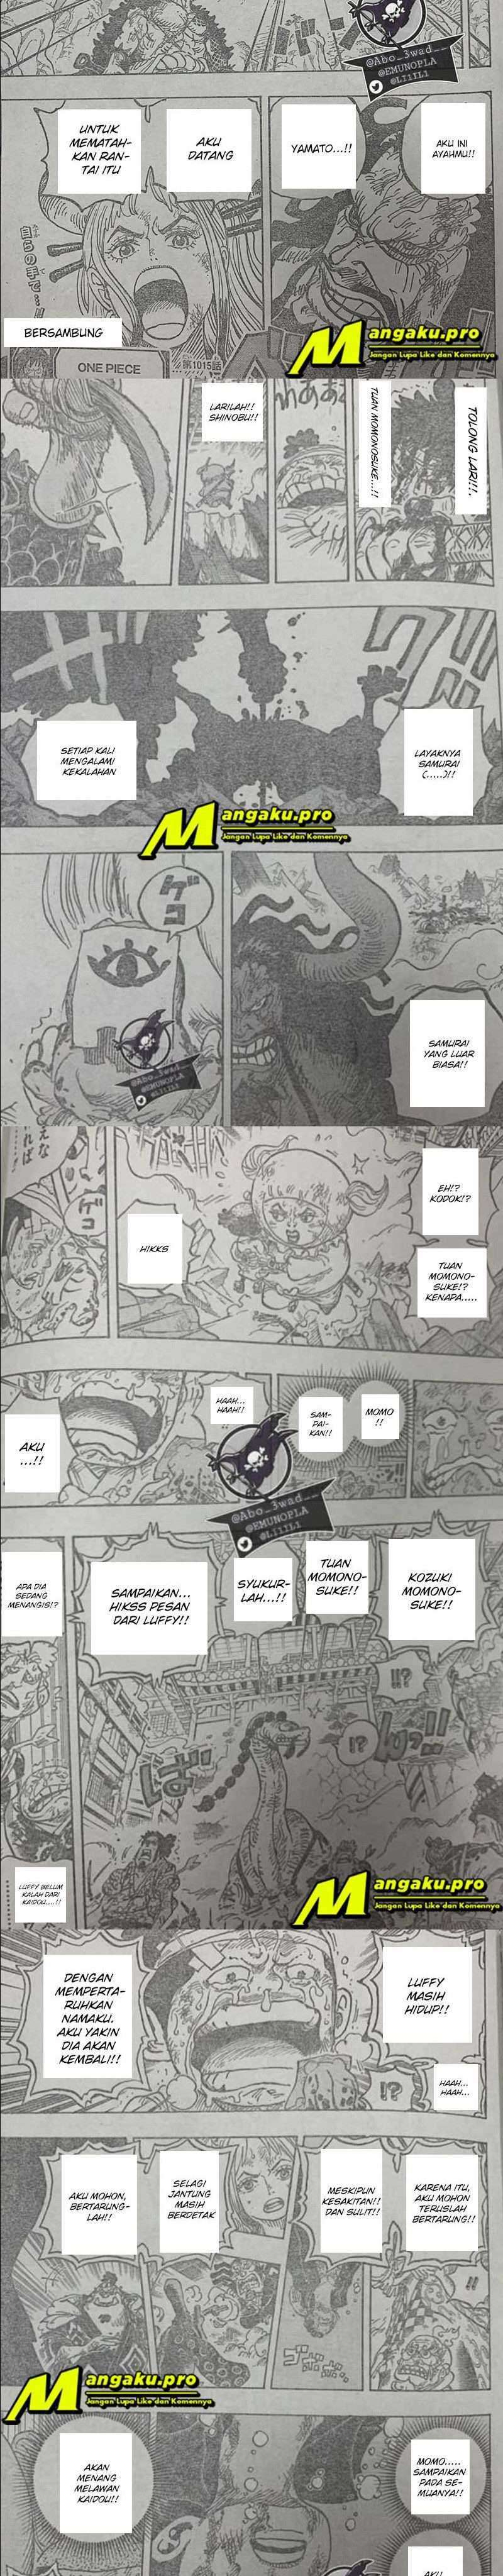 One Piece Chapter 1015 Lq - 43